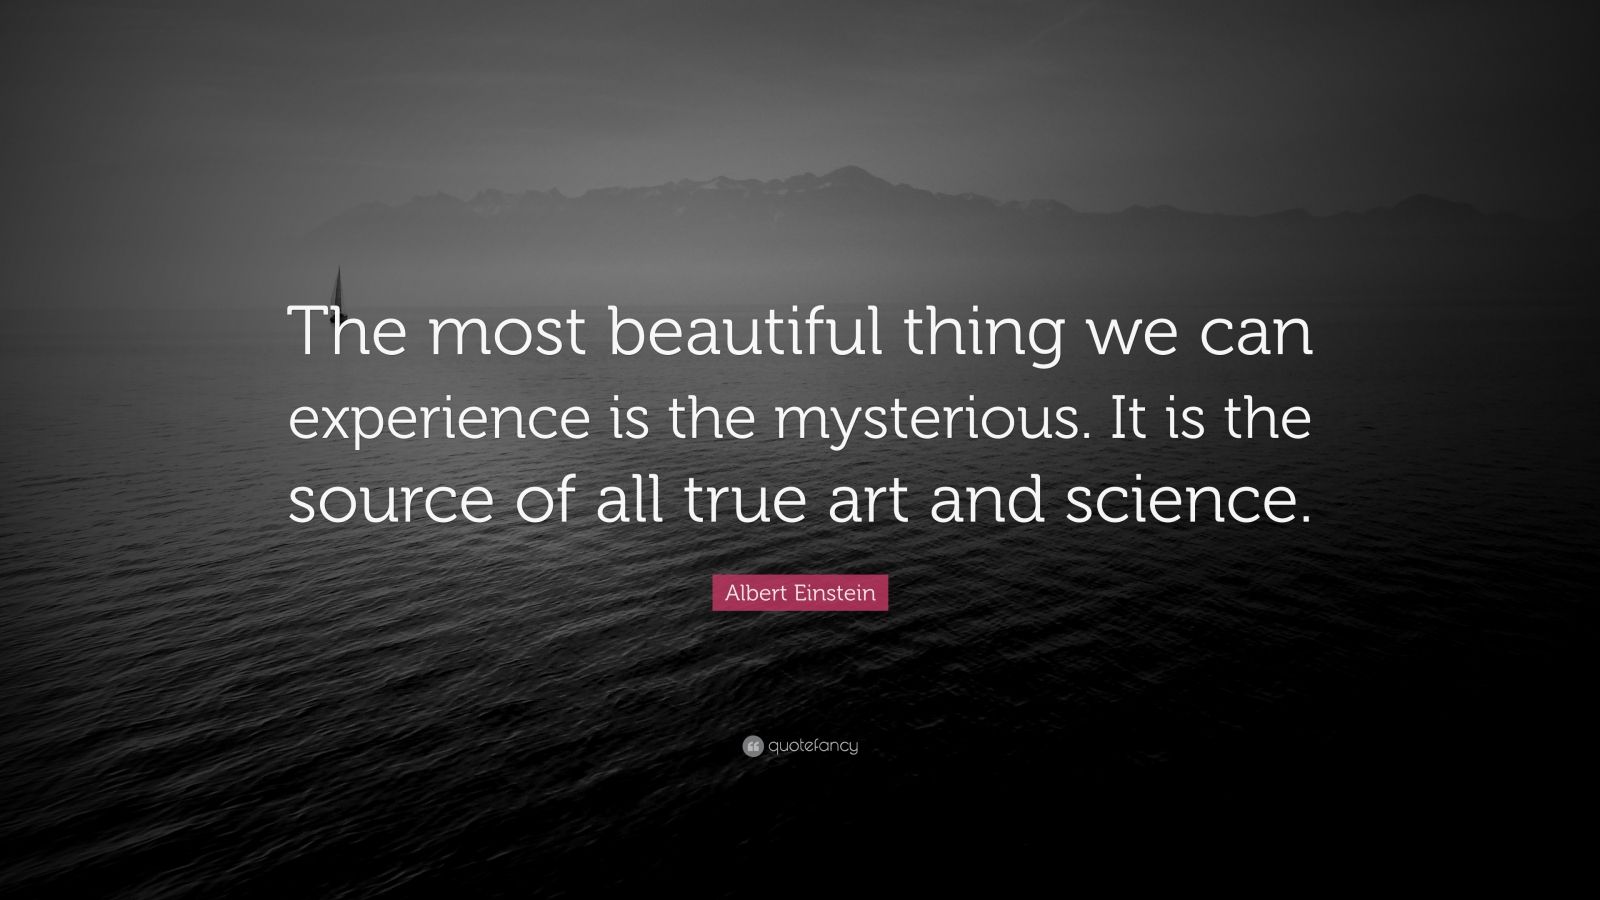 Albert Einstein Quote “The most beautiful thing we can